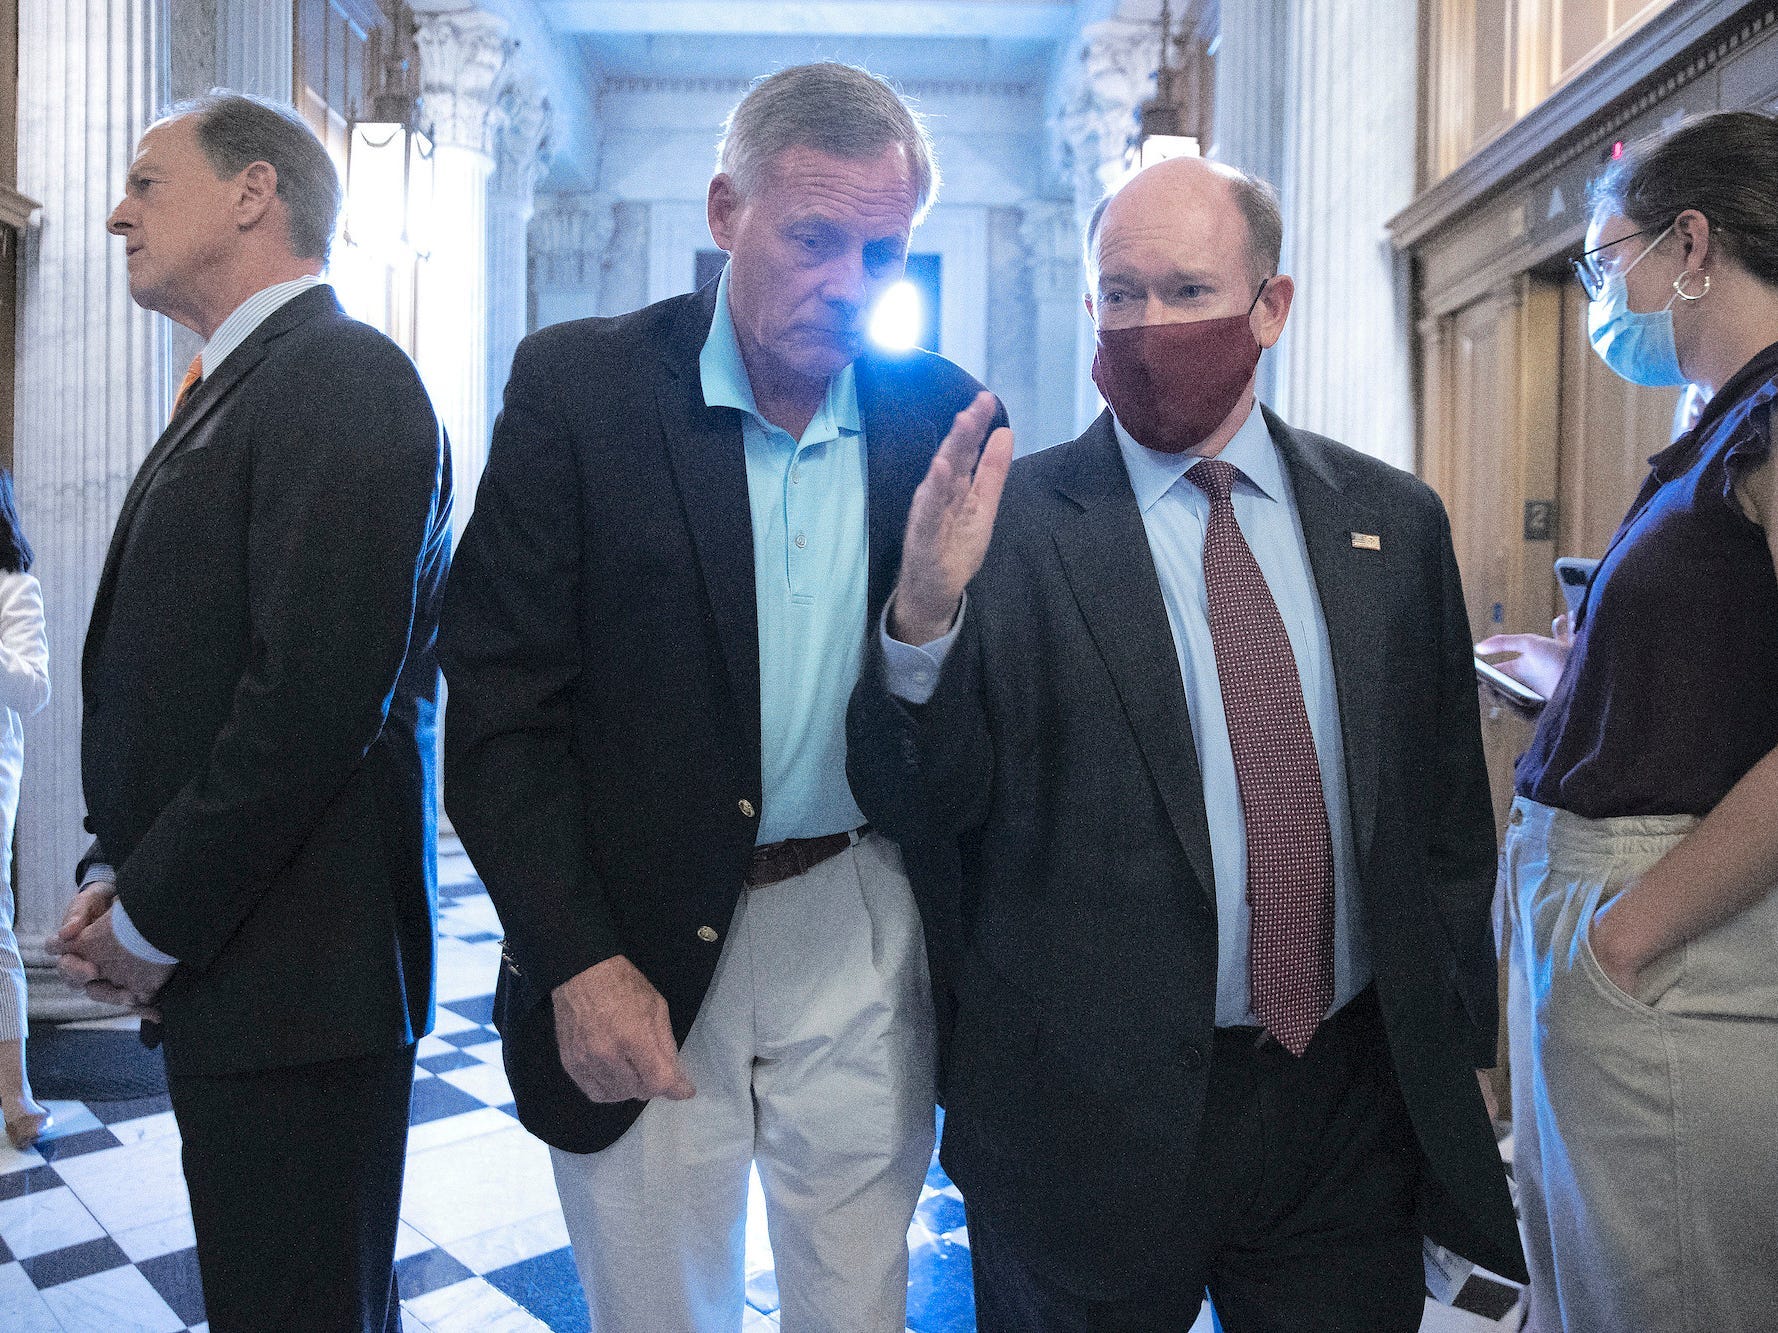 Sen. Richard Burr, a Republican of North Carolina, and Sen. Chris Coons, a Democrat of Delaware, talk as they head to the Senate Chamber for votes at the US Capitol on September 20, 2021.